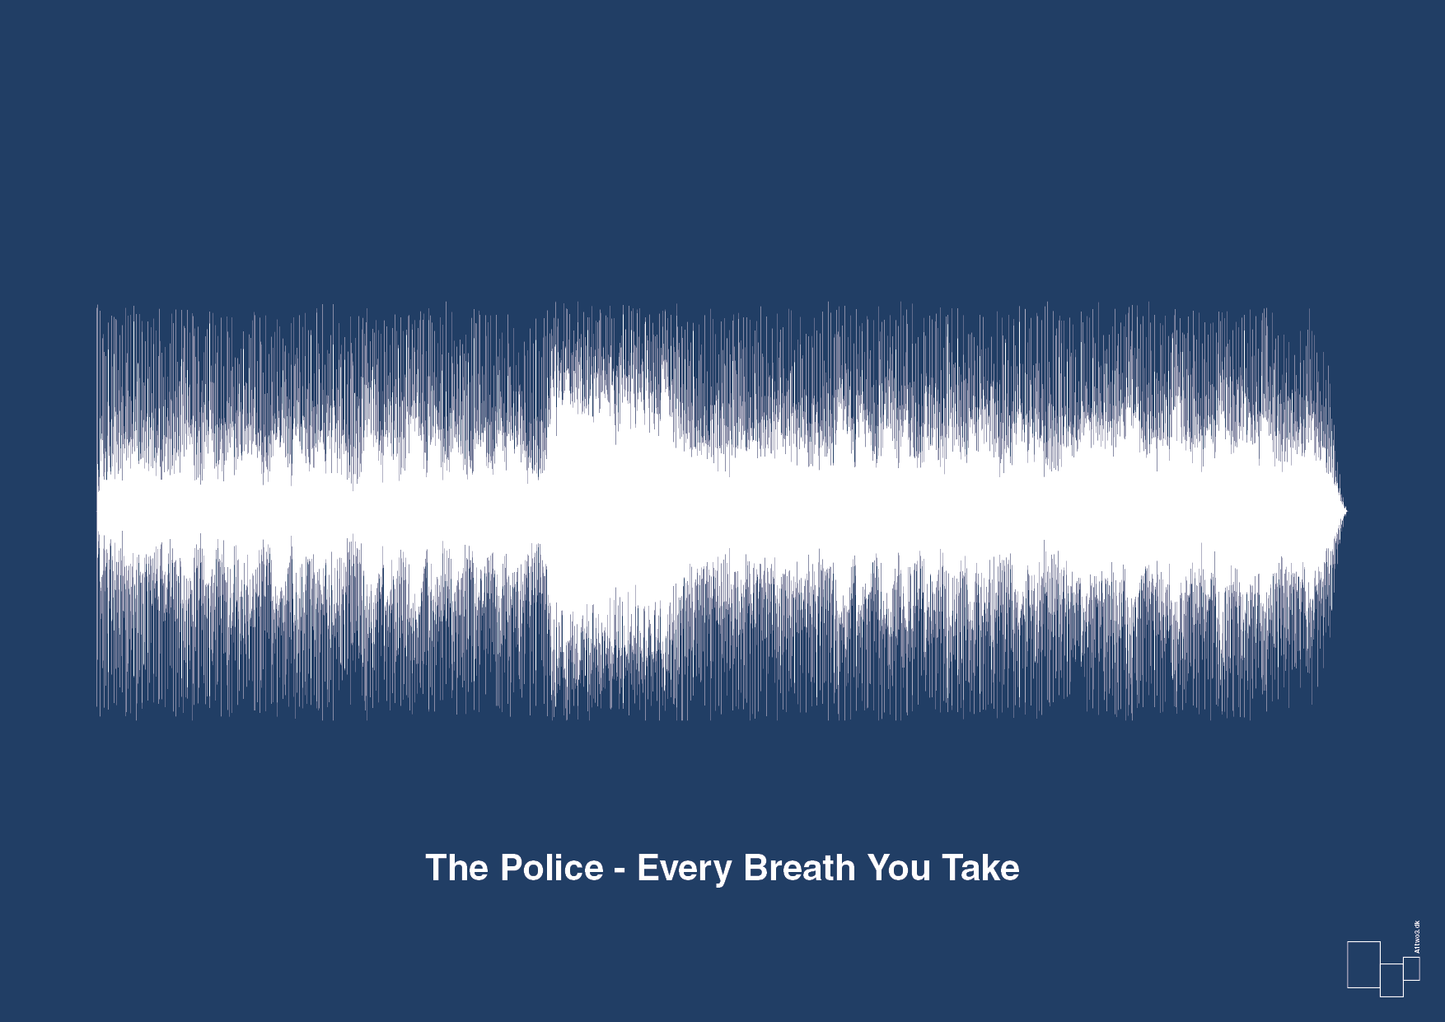 the police - every breath you take - Plakat med Musik i Lapis Blue